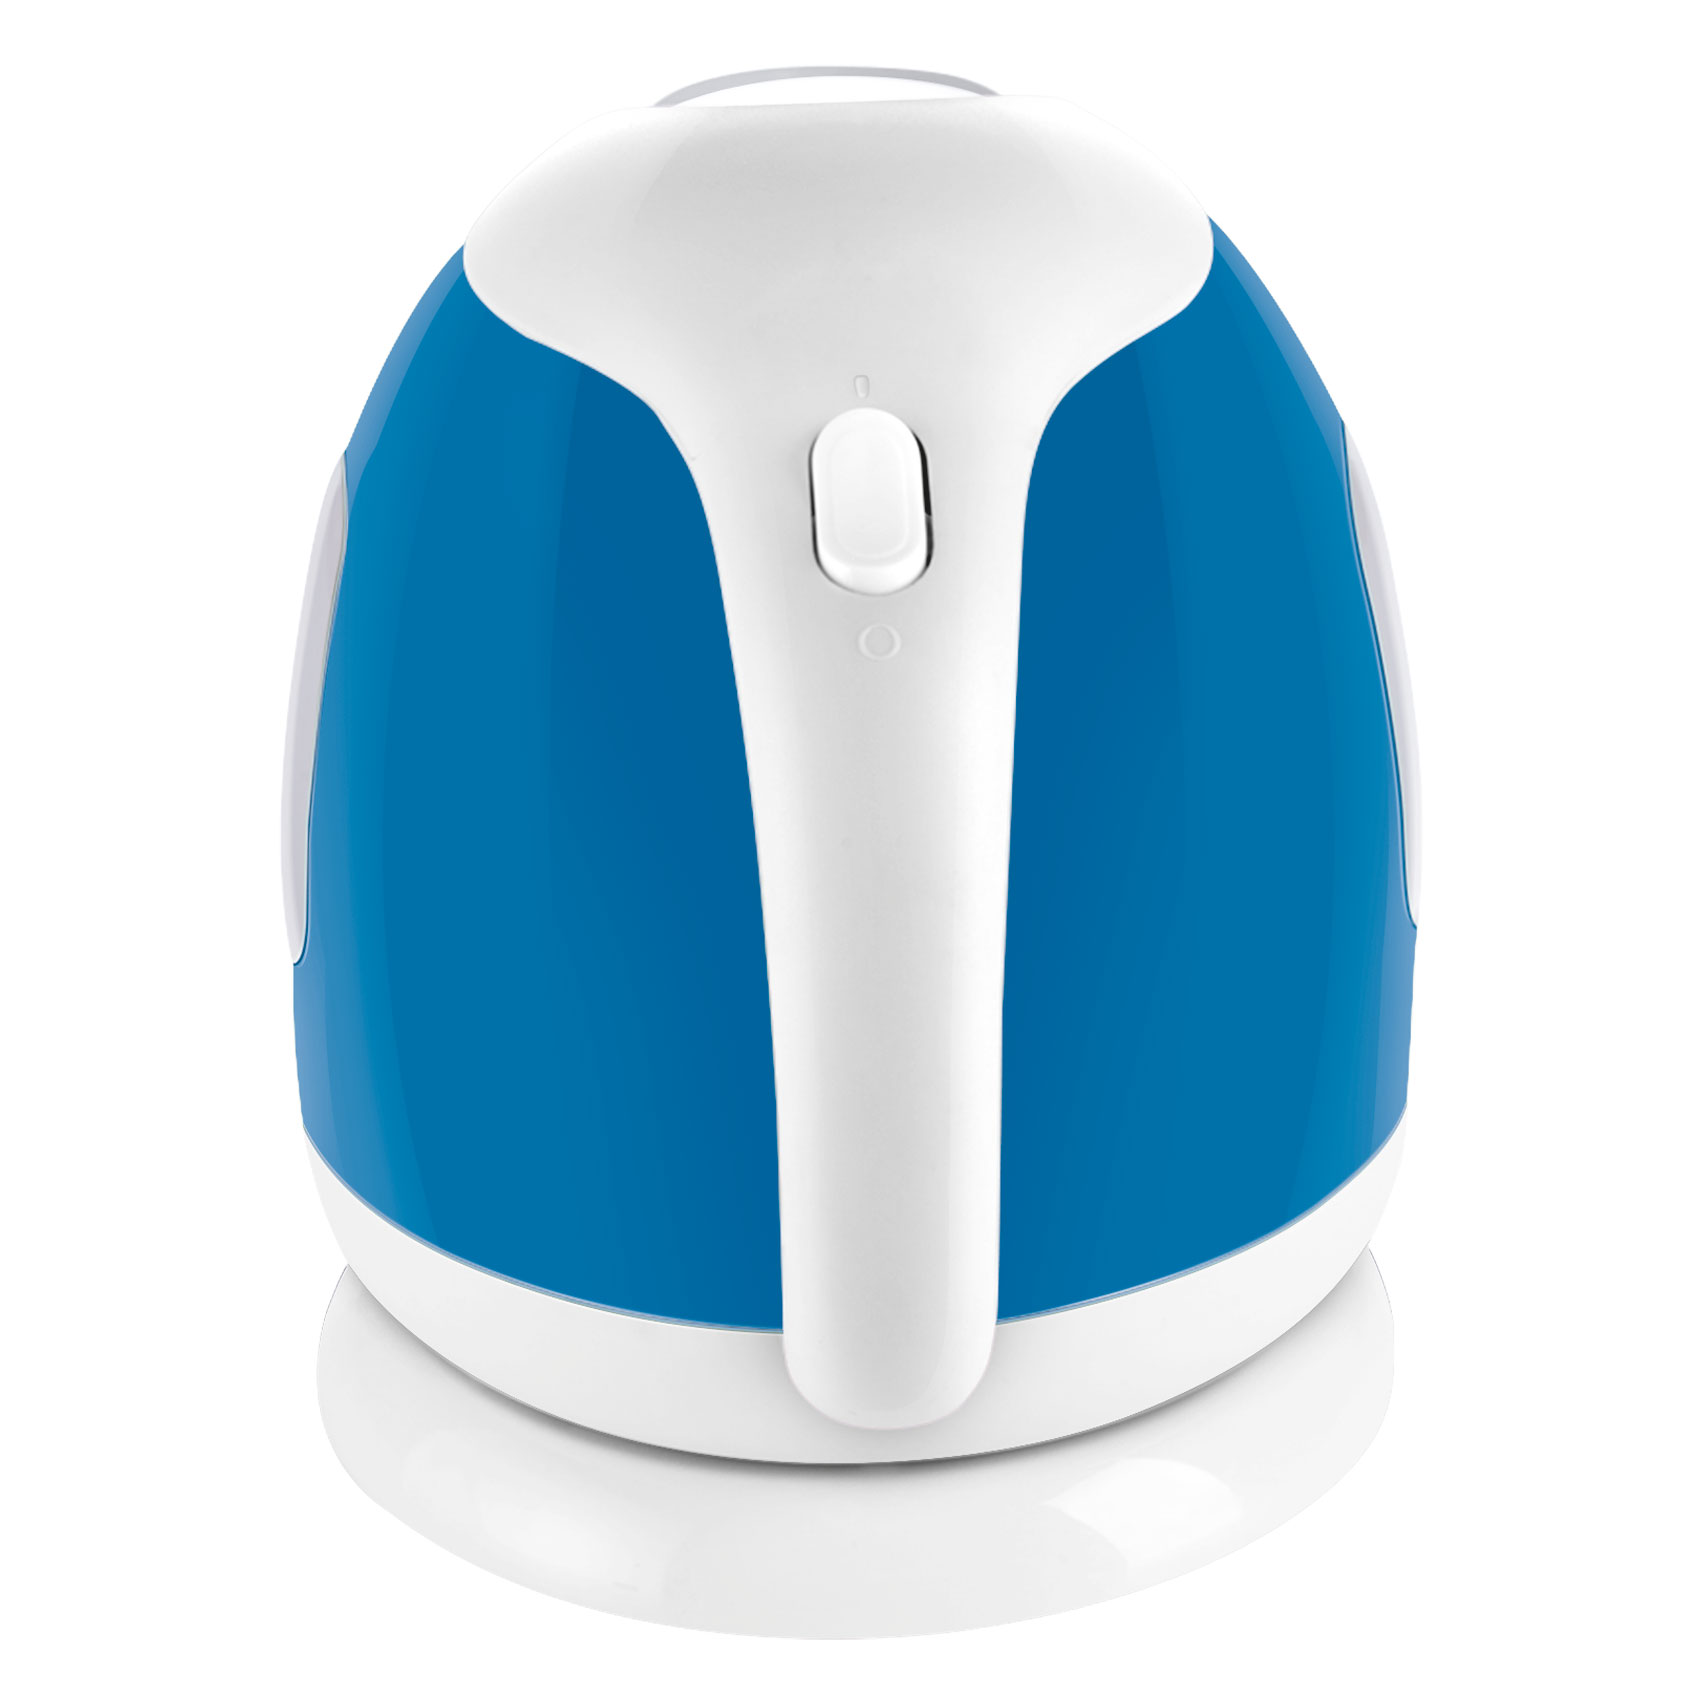 Sencor SWK 42BL-NAB1 Electric Kettle, Small, Forget-Me-Not Blue